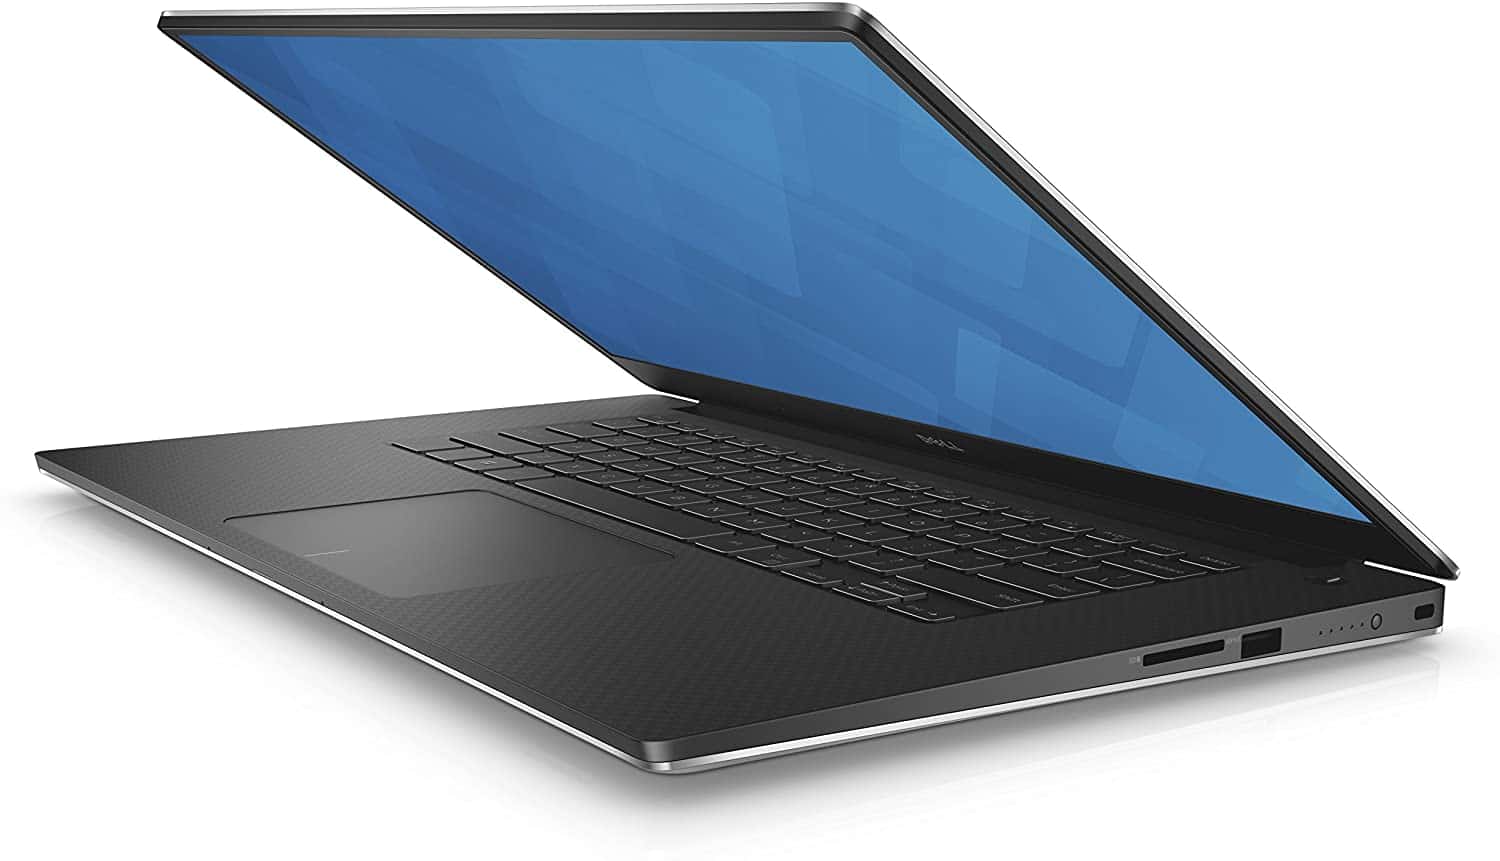 dell-precision-5510-features_1587373019.jpg